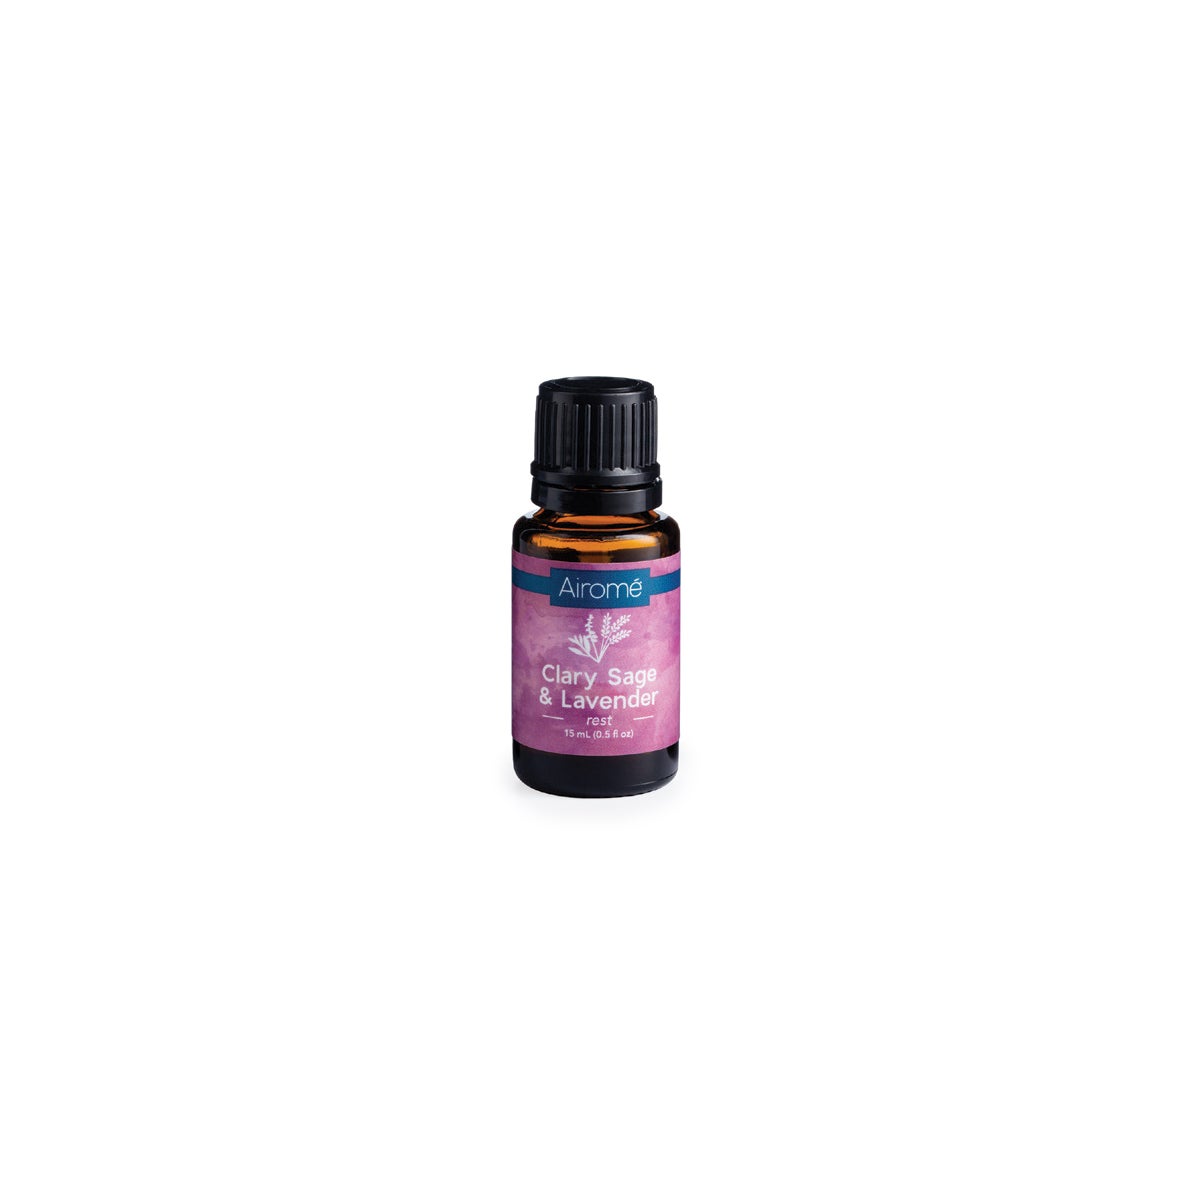 Essential Oil Blend 15 ml - Clary Sage and Lavender